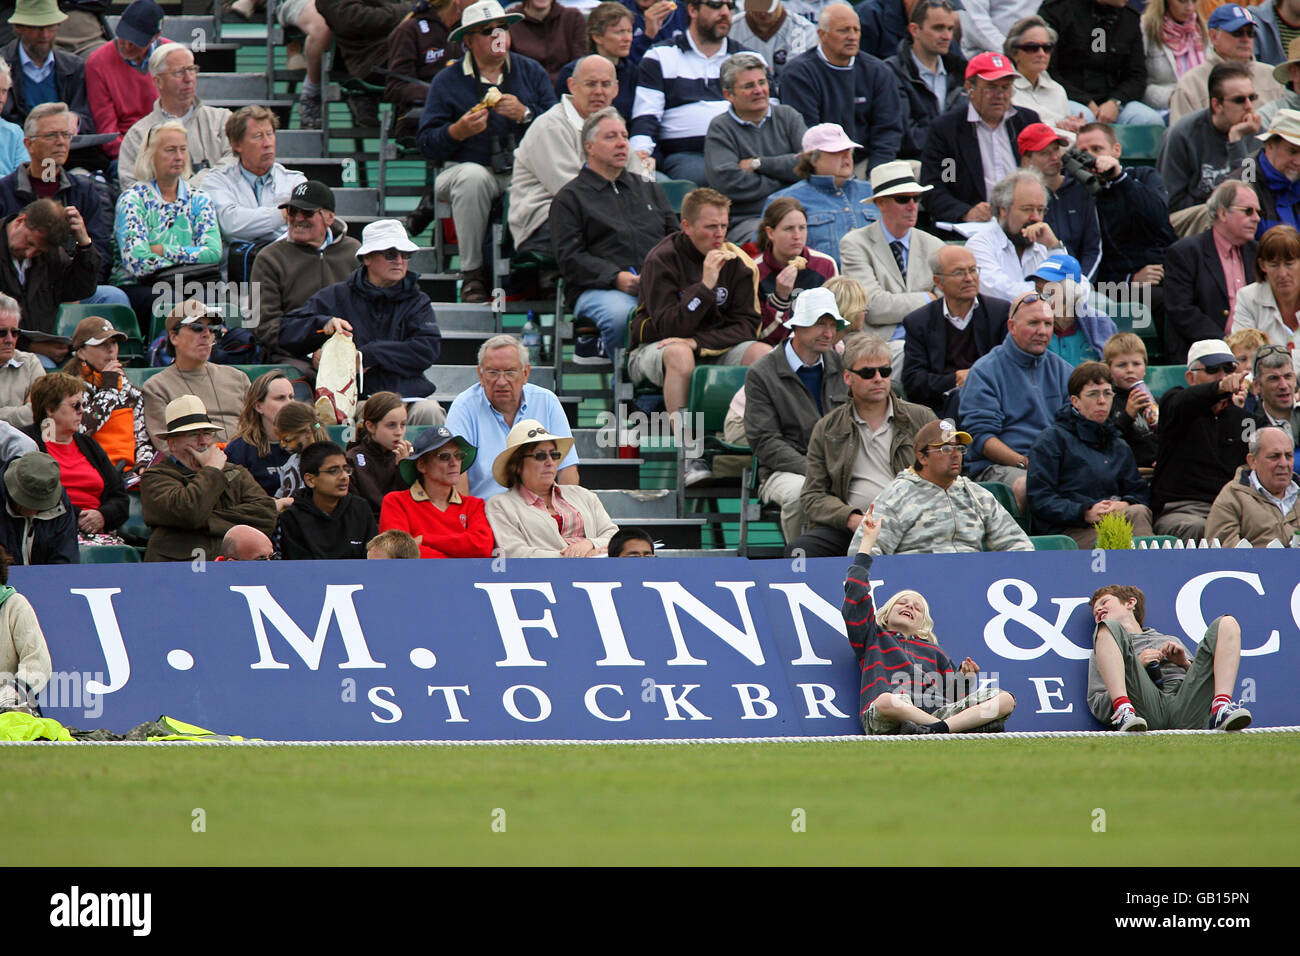 Fans and spectators enjoy the game from behind the boundary rope, at Guildford Cricket Club. Stock Photo